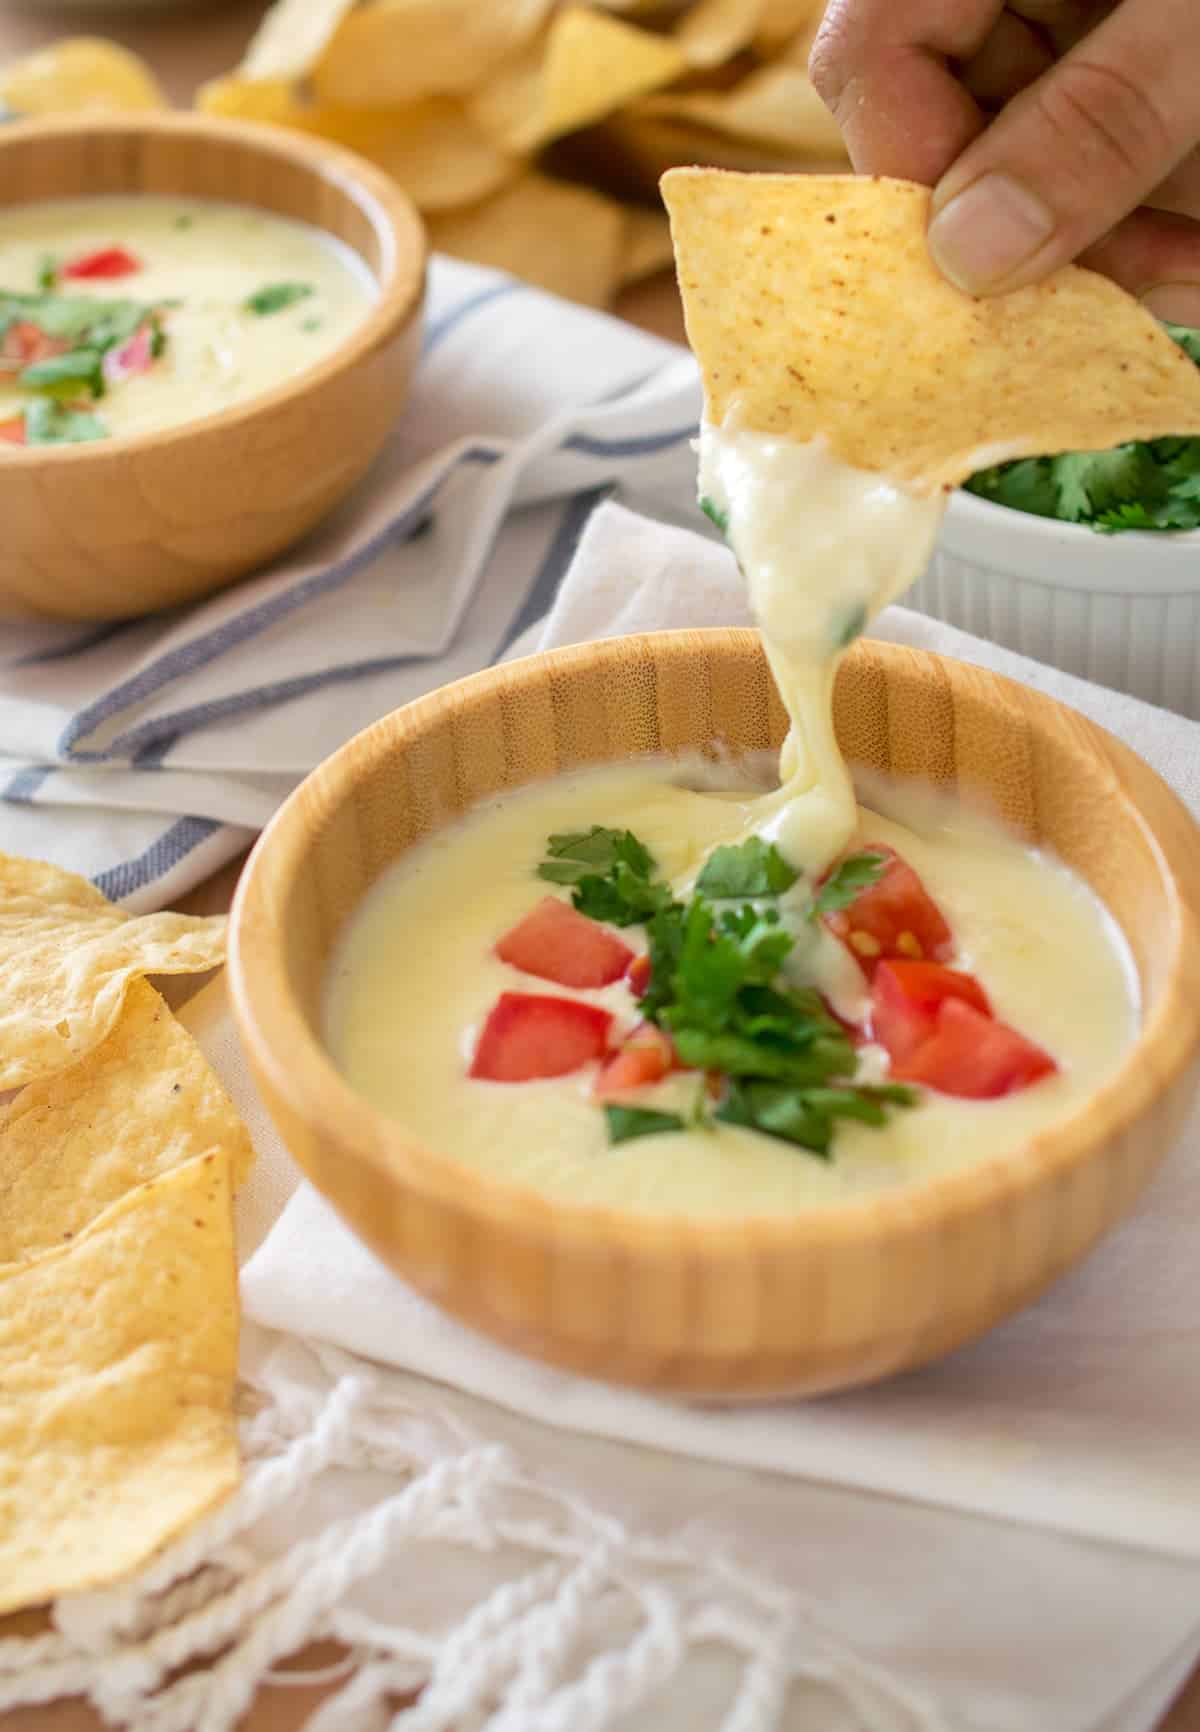 Restaurant style Mexican white Cheese Dip with pico de gallo topping in wooden bowl on dish cloth with chips.